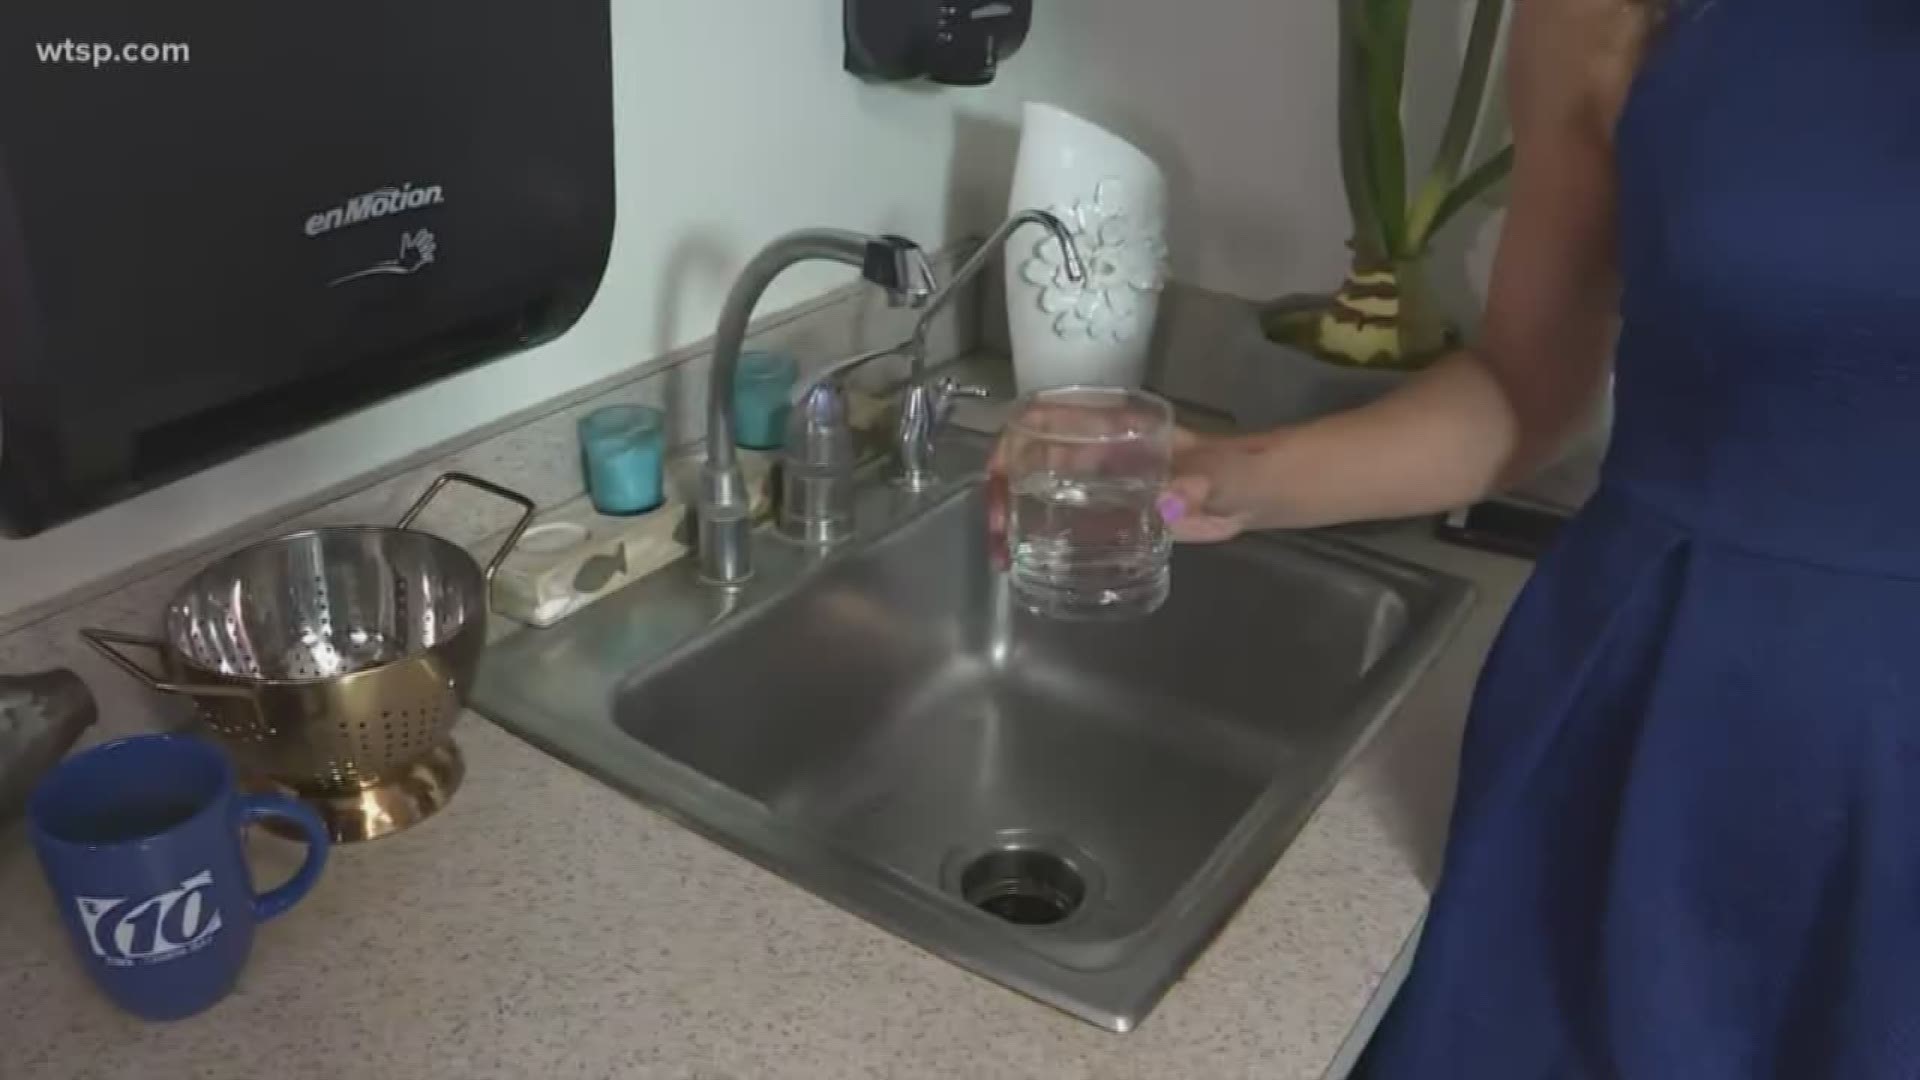 The city gave final approval to add fluoride to the water system in April 2018. https://on.wtsp.com/2WrxKrl